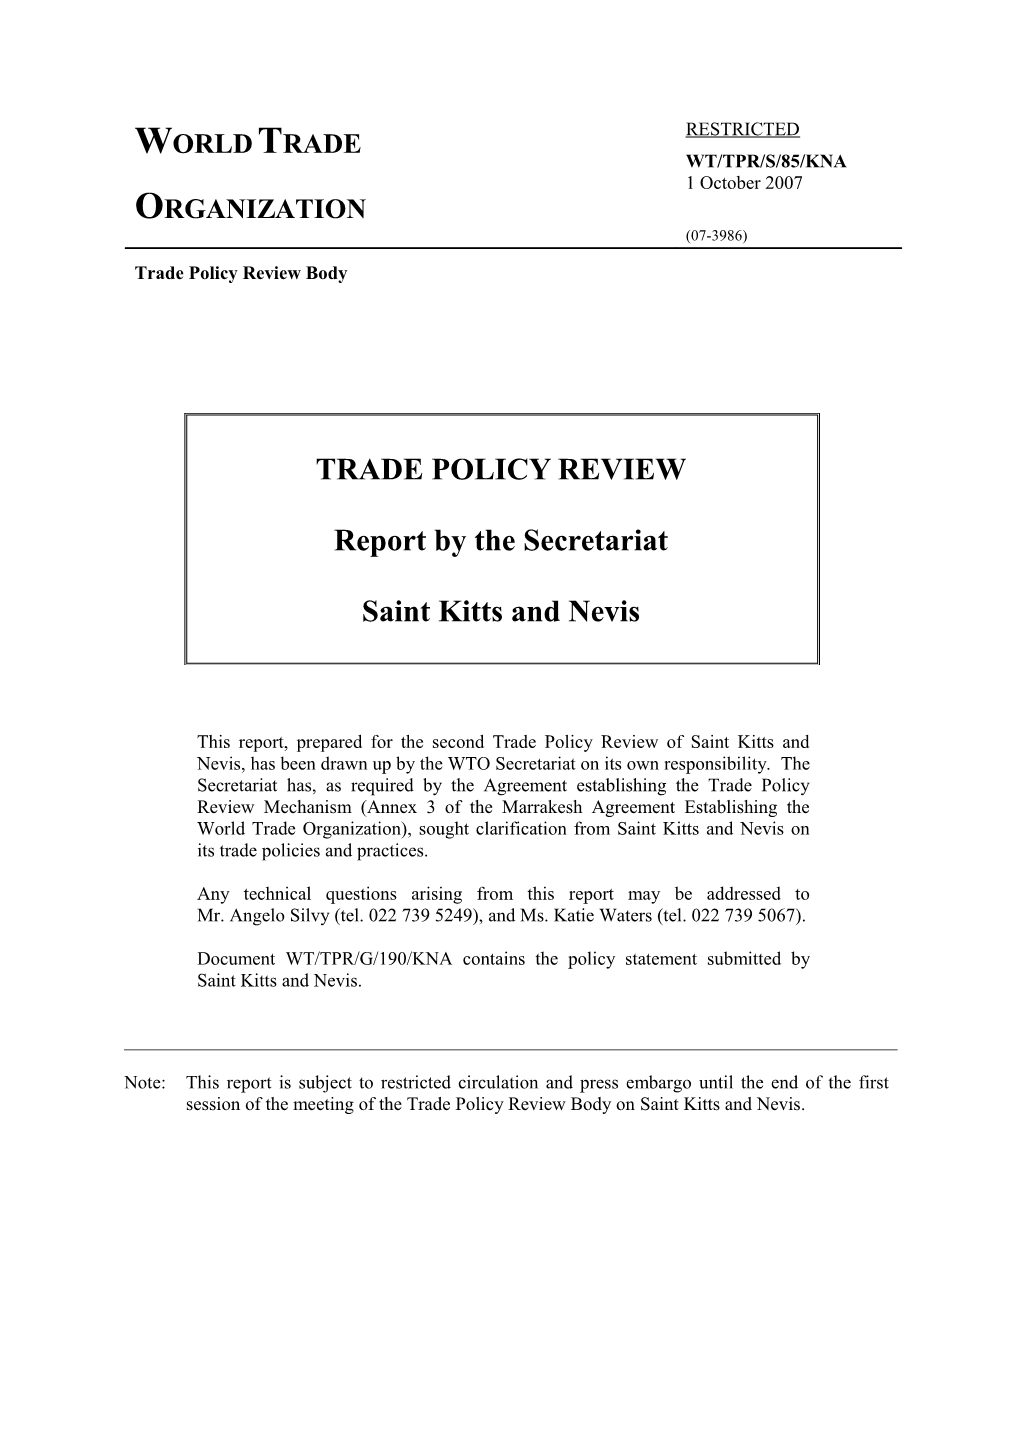 Trade Policy Review Body s7